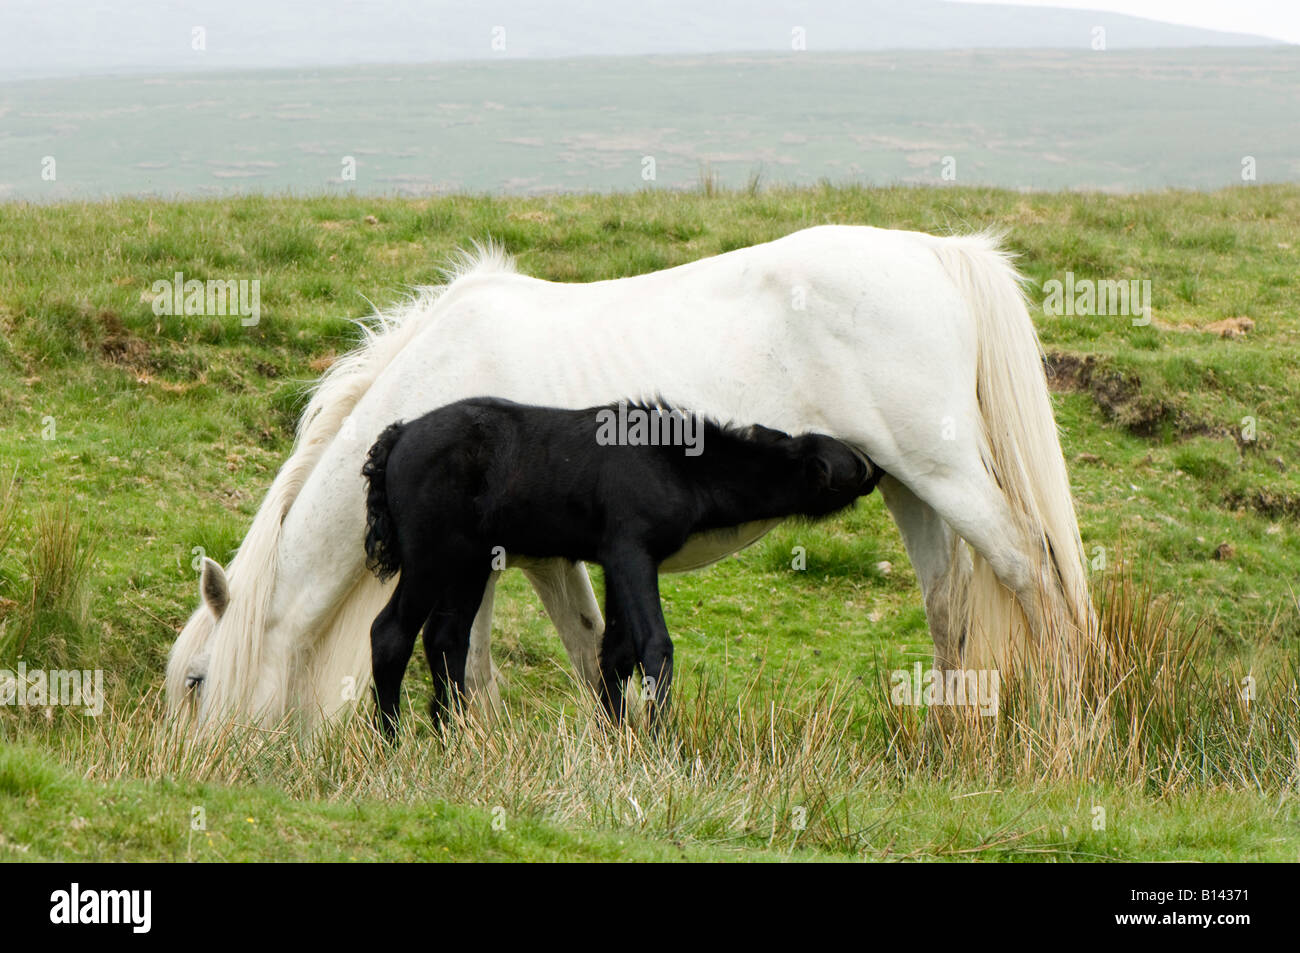 White Fell Pony with a black foal suckling on moorland Ravenstonedale Cumbria Stock Photo